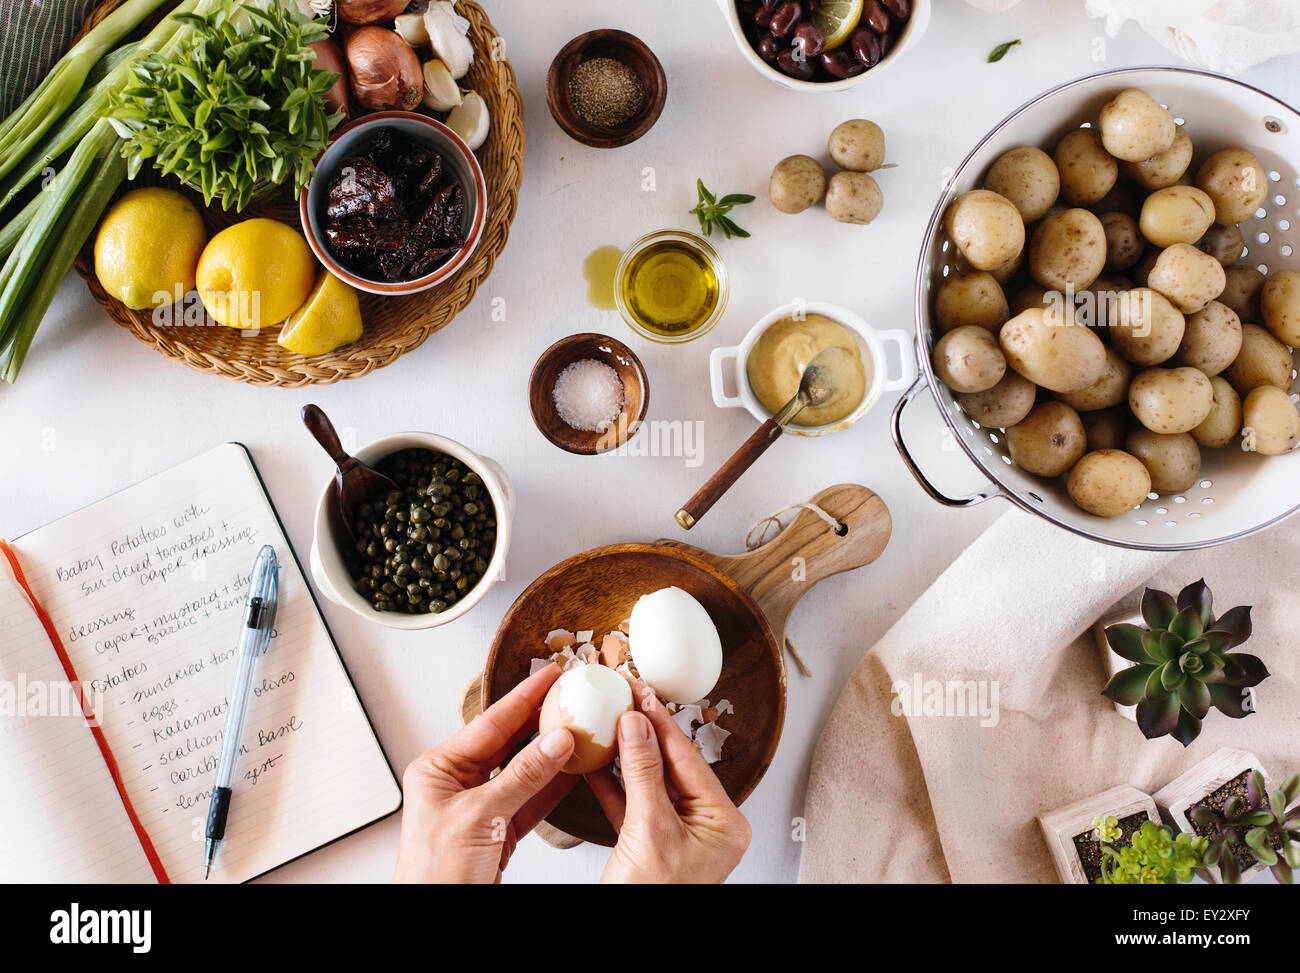 A person is peeling eggs for a baby potato salad Stock Photo